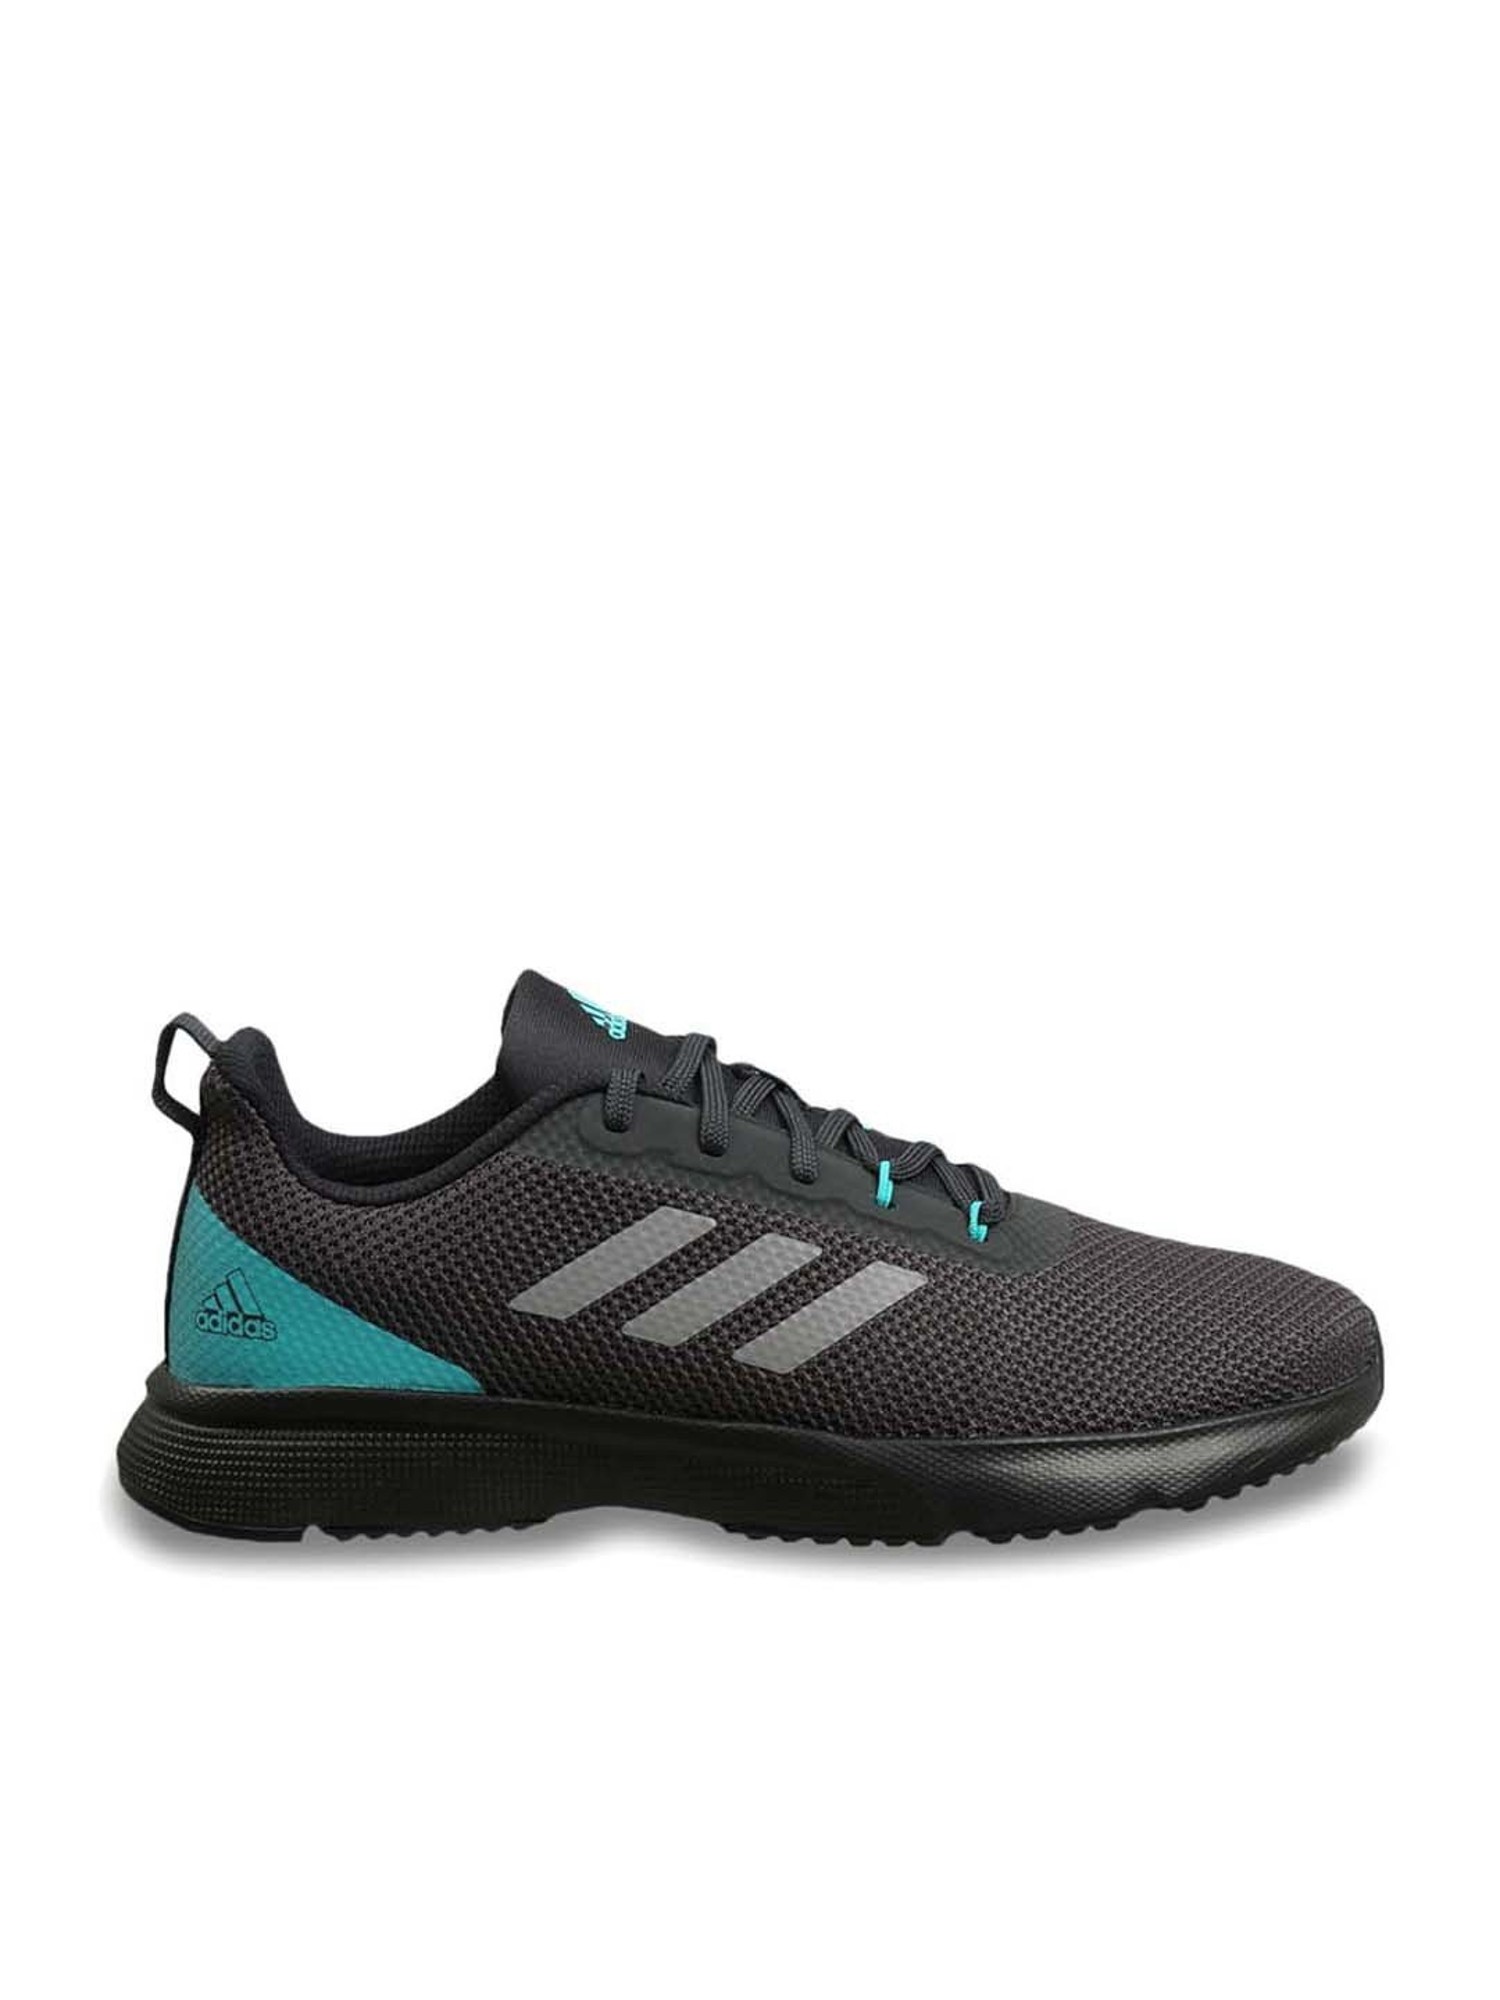 Buy Adidas Running Shoes For Women At Best Price Online In India | Myntra